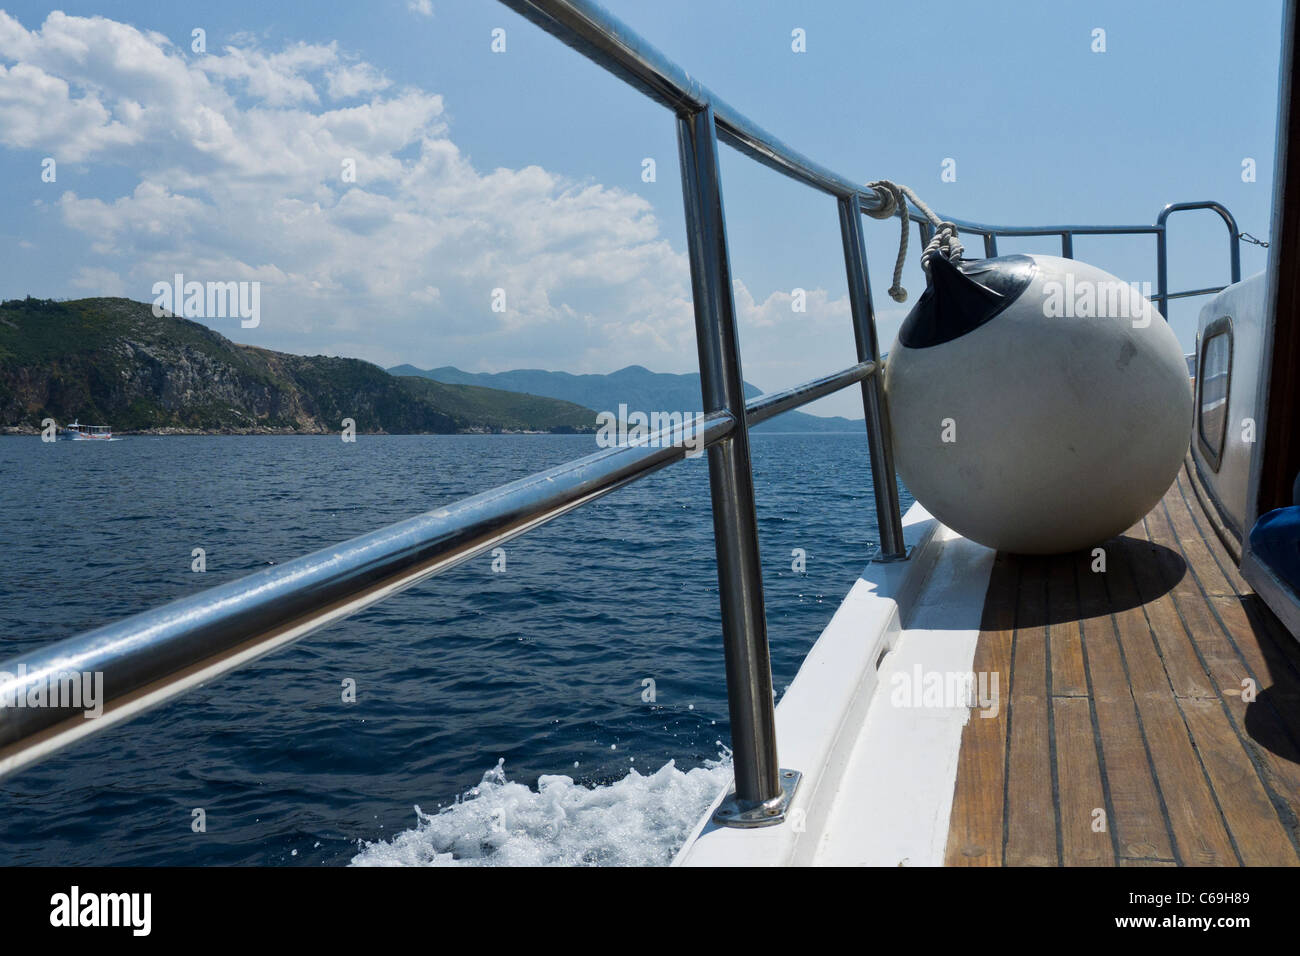 Sailing on the Adriatic Sea between Dubrovnik and Cavtat on the Croatian Coast. Stock Photo